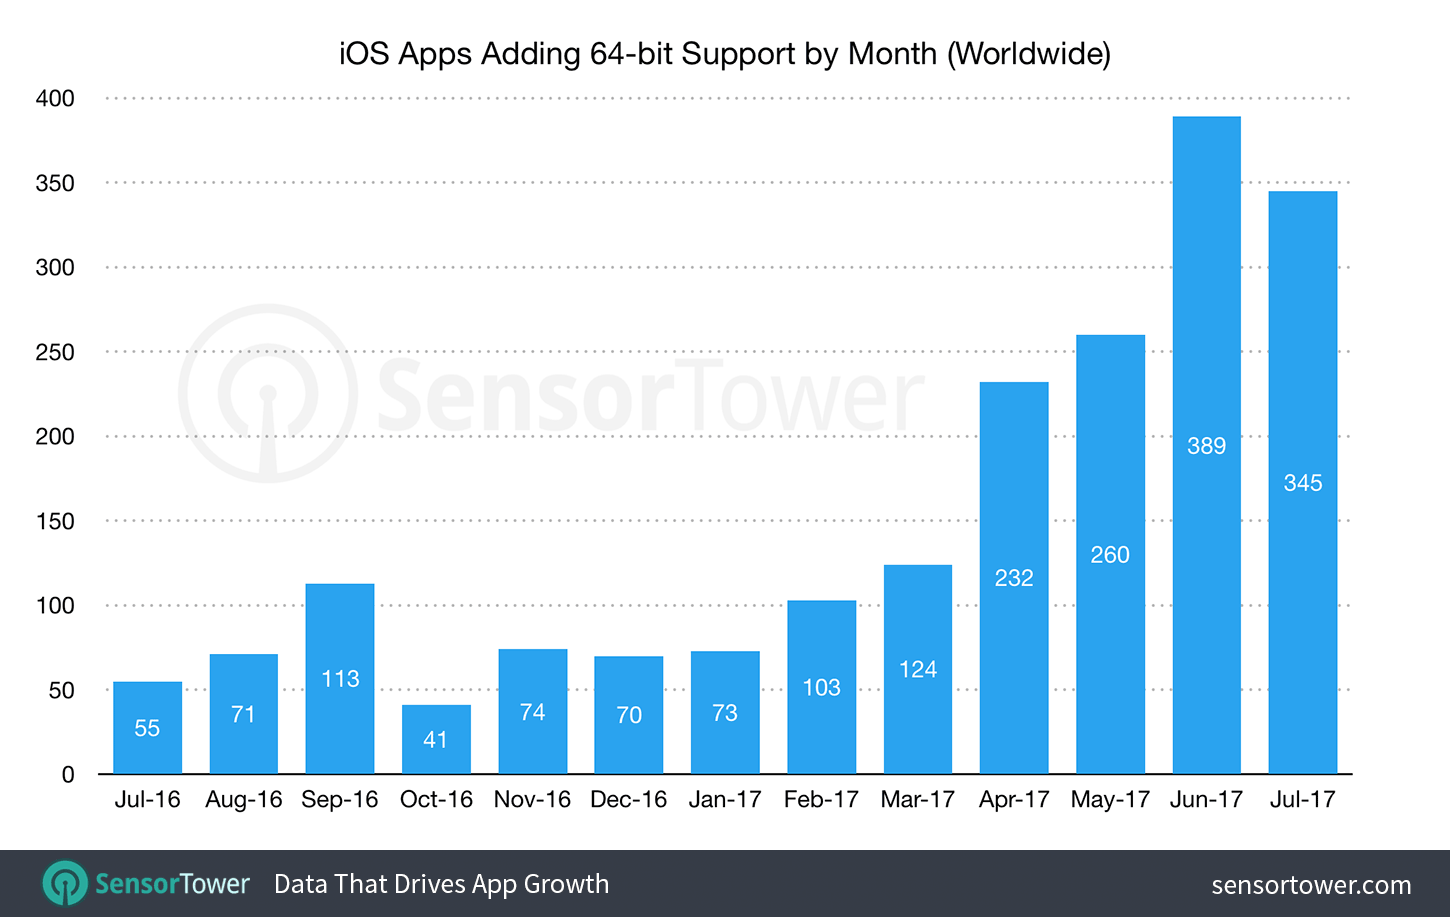 Monthly count of iOS apps adding 64-bit processor support from July 2016 through July 2017 worldwide